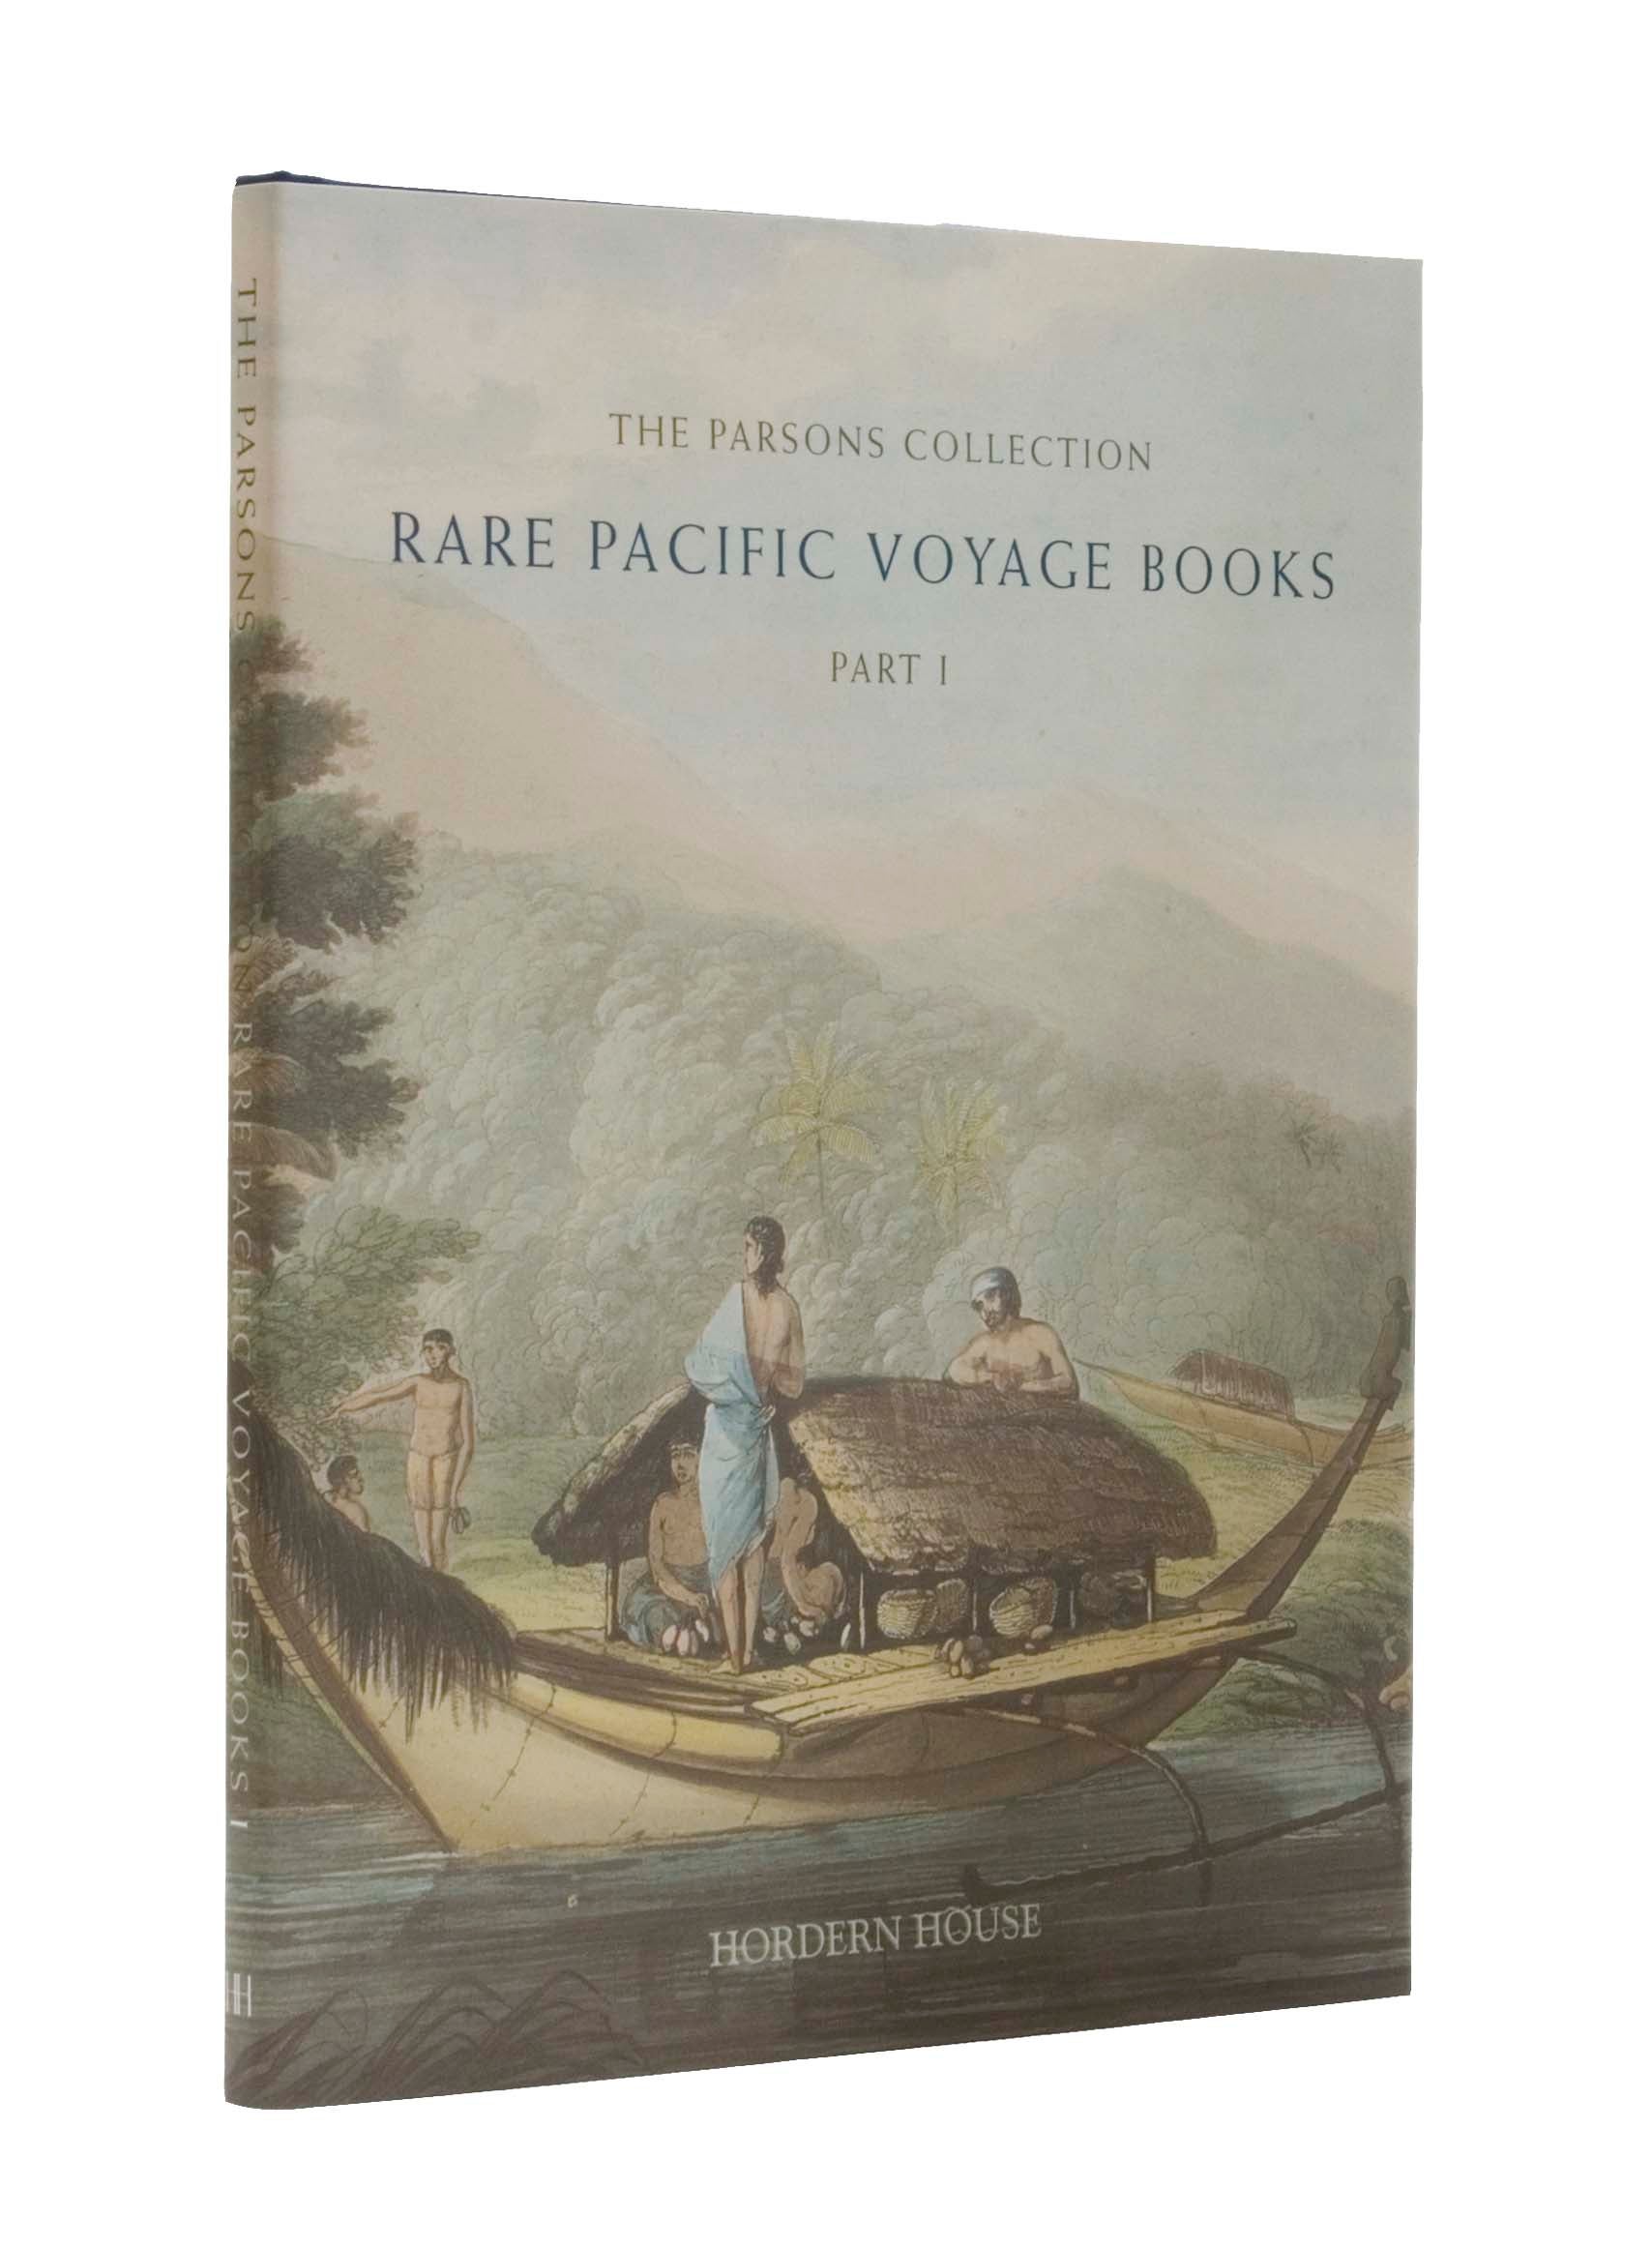 Rare Pacific Voyage Books: The Parsons Collection Part I